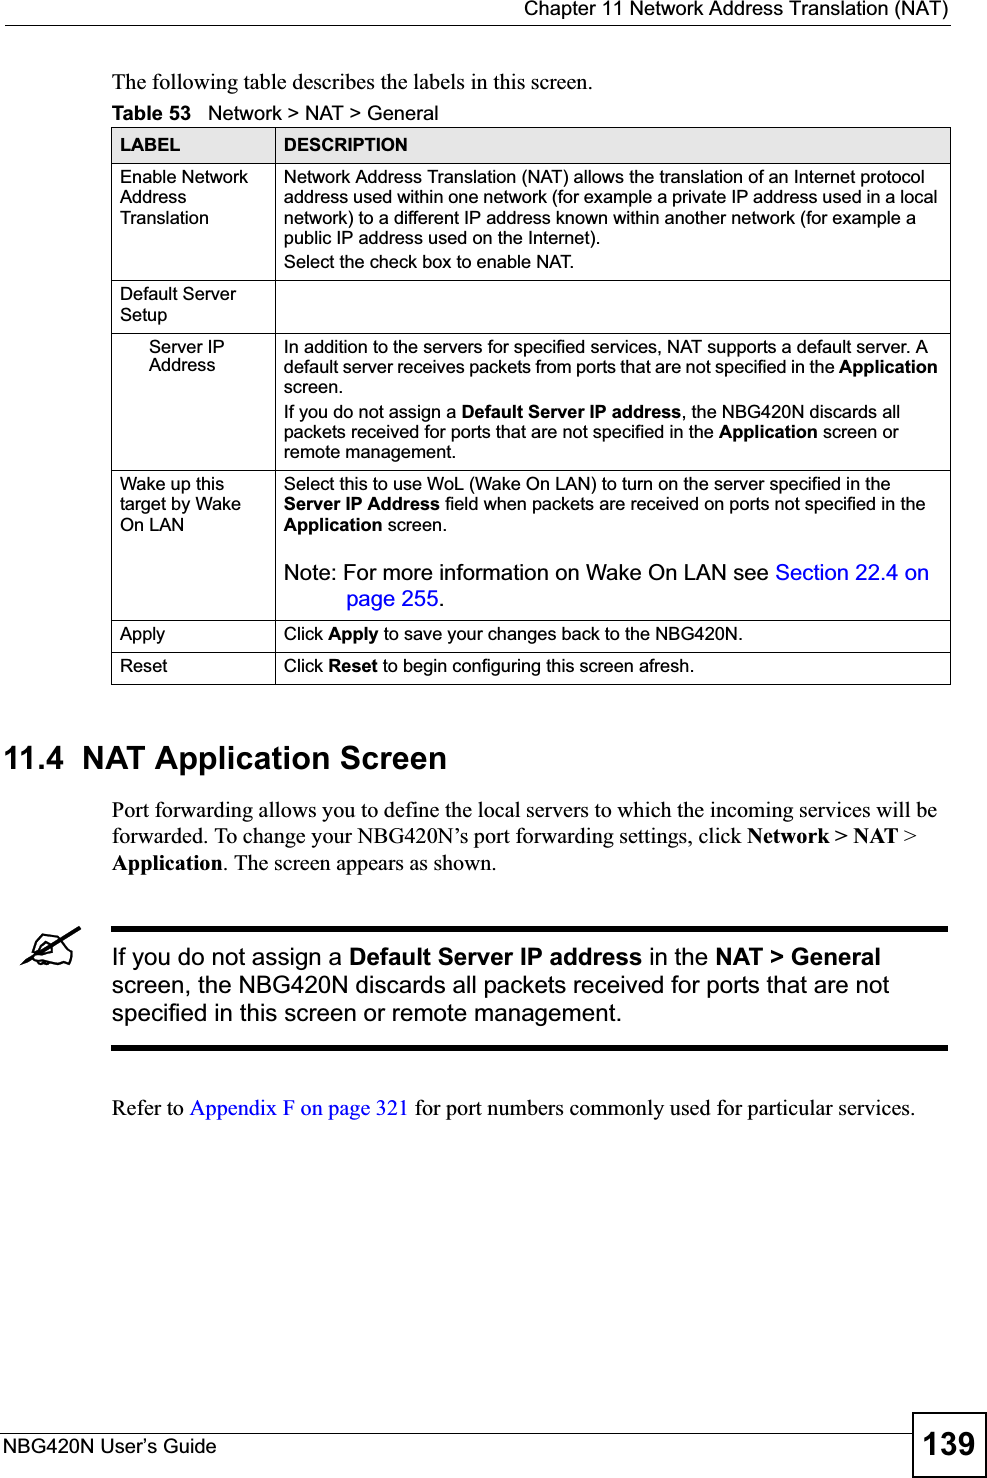  Chapter 11 Network Address Translation (NAT)NBG420N User’s Guide 139The following table describes the labels in this screen.11.4  NAT Application Screen   Port forwarding allows you to define the local servers to which the incoming services will be forwarded. To change your NBG420N’s port forwarding settings, click Network &gt; NAT &gt; Application. The screen appears as shown.&quot;If you do not assign a Default Server IP address in the NAT &gt; General screen, the NBG420N discards all packets received for ports that are not specified in this screen or remote management.Refer to Appendix F on page 321 for port numbers commonly used for particular services.Table 53   Network &gt; NAT &gt; GeneralLABEL DESCRIPTIONEnable Network Address TranslationNetwork Address Translation (NAT) allows the translation of an Internet protocol address used within one network (for example a private IP address used in a local network) to a different IP address known within another network (for example a public IP address used on the Internet). Select the check box to enable NAT.Default Server SetupServer IP AddressIn addition to the servers for specified services, NAT supports a default server. A default server receives packets from ports that are not specified in the Applicationscreen.If you do not assign a Default Server IP address, the NBG420N discards all packets received for ports that are not specified in the Application screen or remote management.Wake up this target by Wake On LANSelect this to use WoL (Wake On LAN) to turn on the server specified in the Server IP Address field when packets are received on ports not specified in the Application screen. Note: For more information on Wake On LAN see Section 22.4 on page 255.Apply Click Apply to save your changes back to the NBG420N.Reset Click Reset to begin configuring this screen afresh.